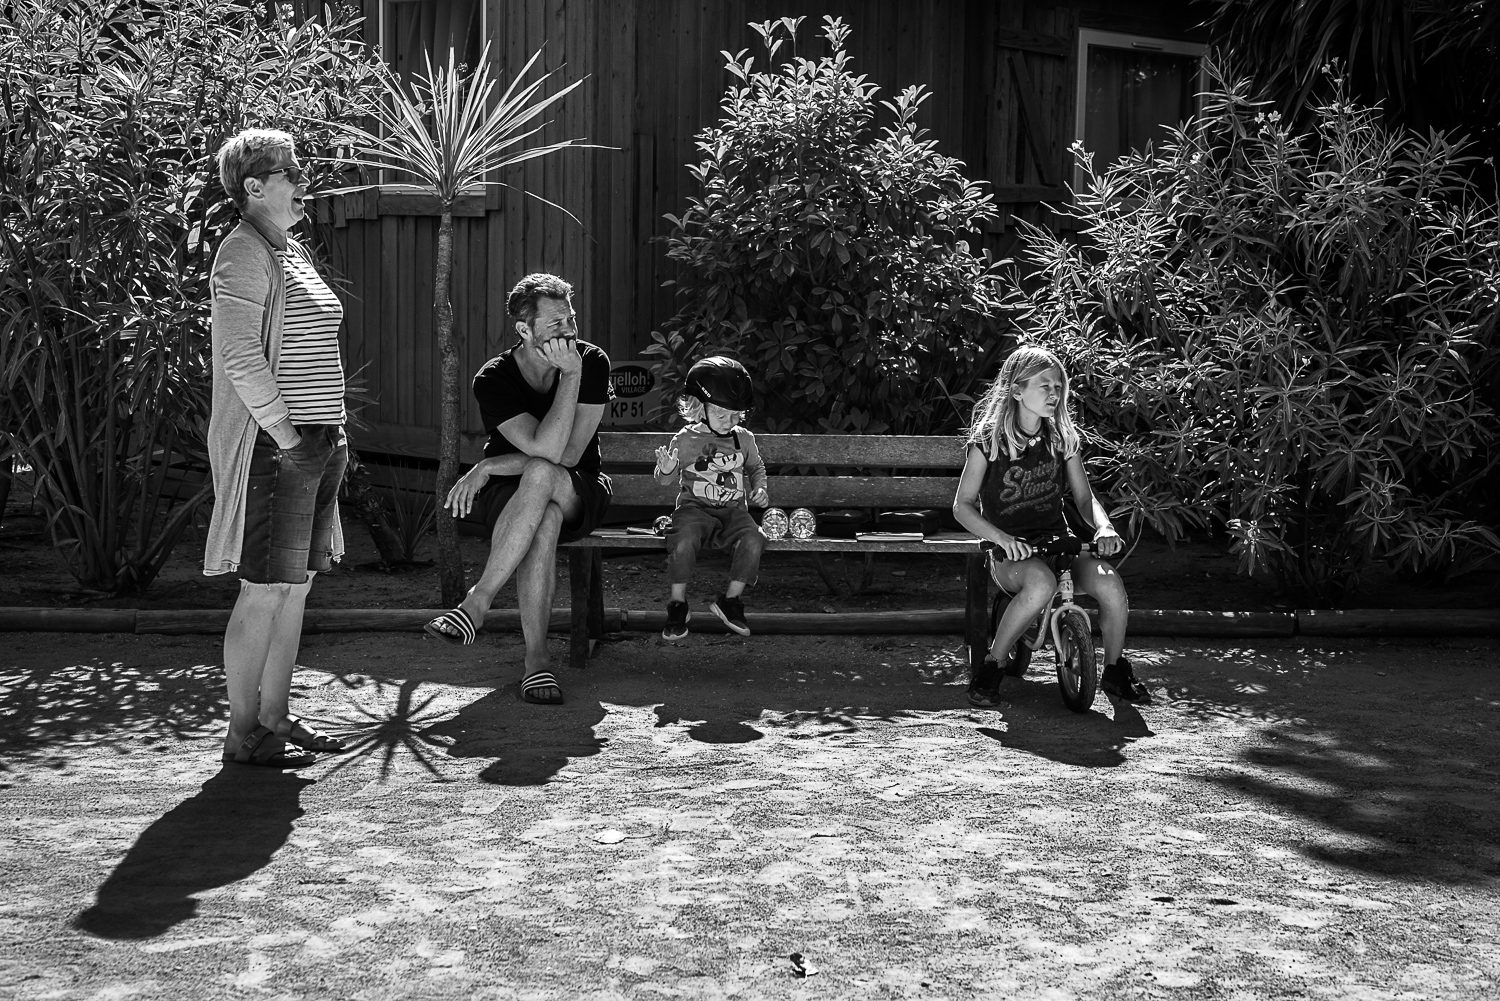 Family holidays in France - Day in the life session - family photojournalism - Camping family life in Beziers France - playing petanque